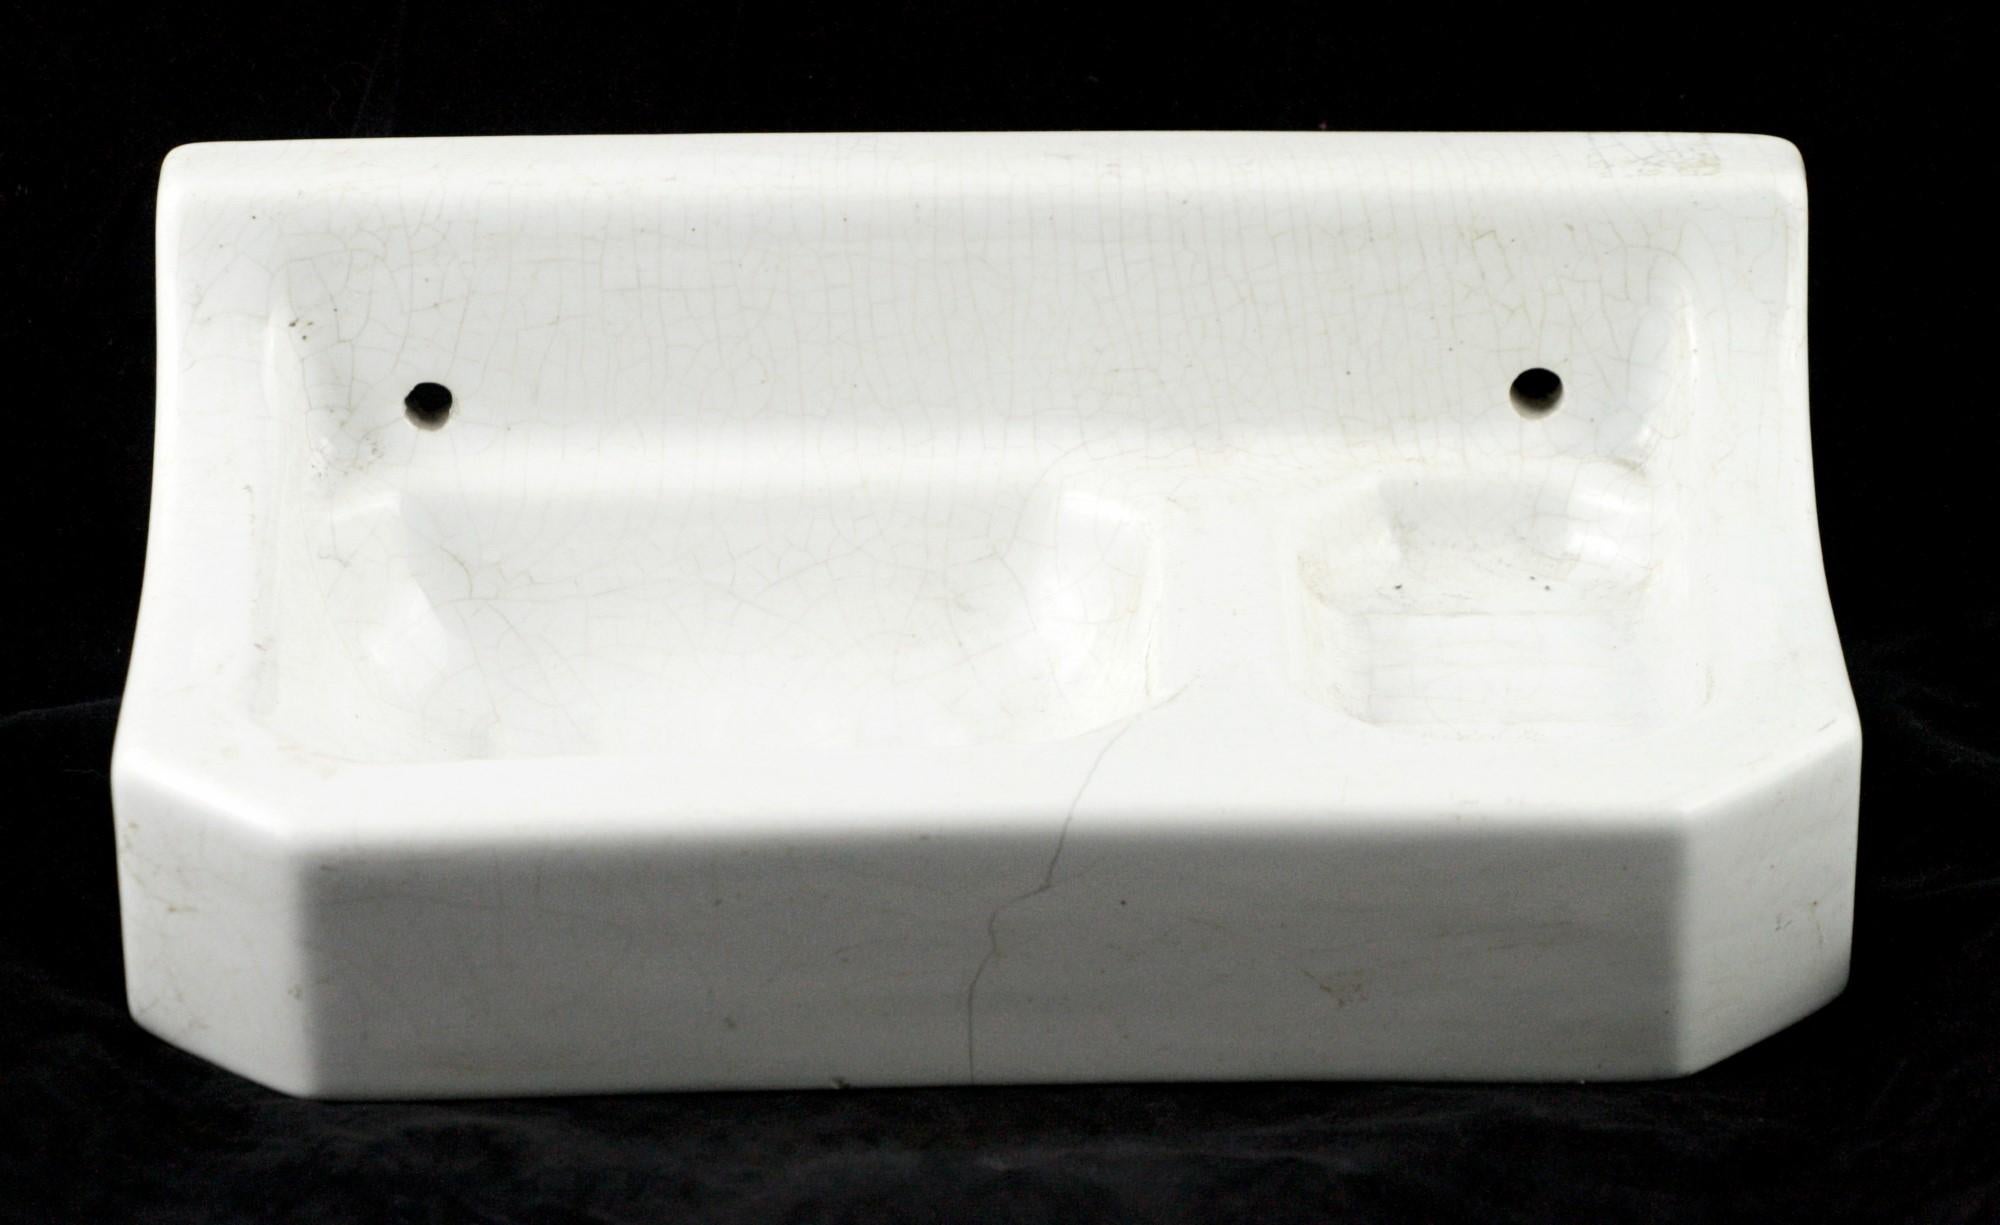 Antique white ceramic French soap and sponge holder with a very desirable slightly crackled glaze. Made to be surface mounted on a wall. From the 1940s. This can be seen at our 400 Gilligan St location in Scranton, PA.